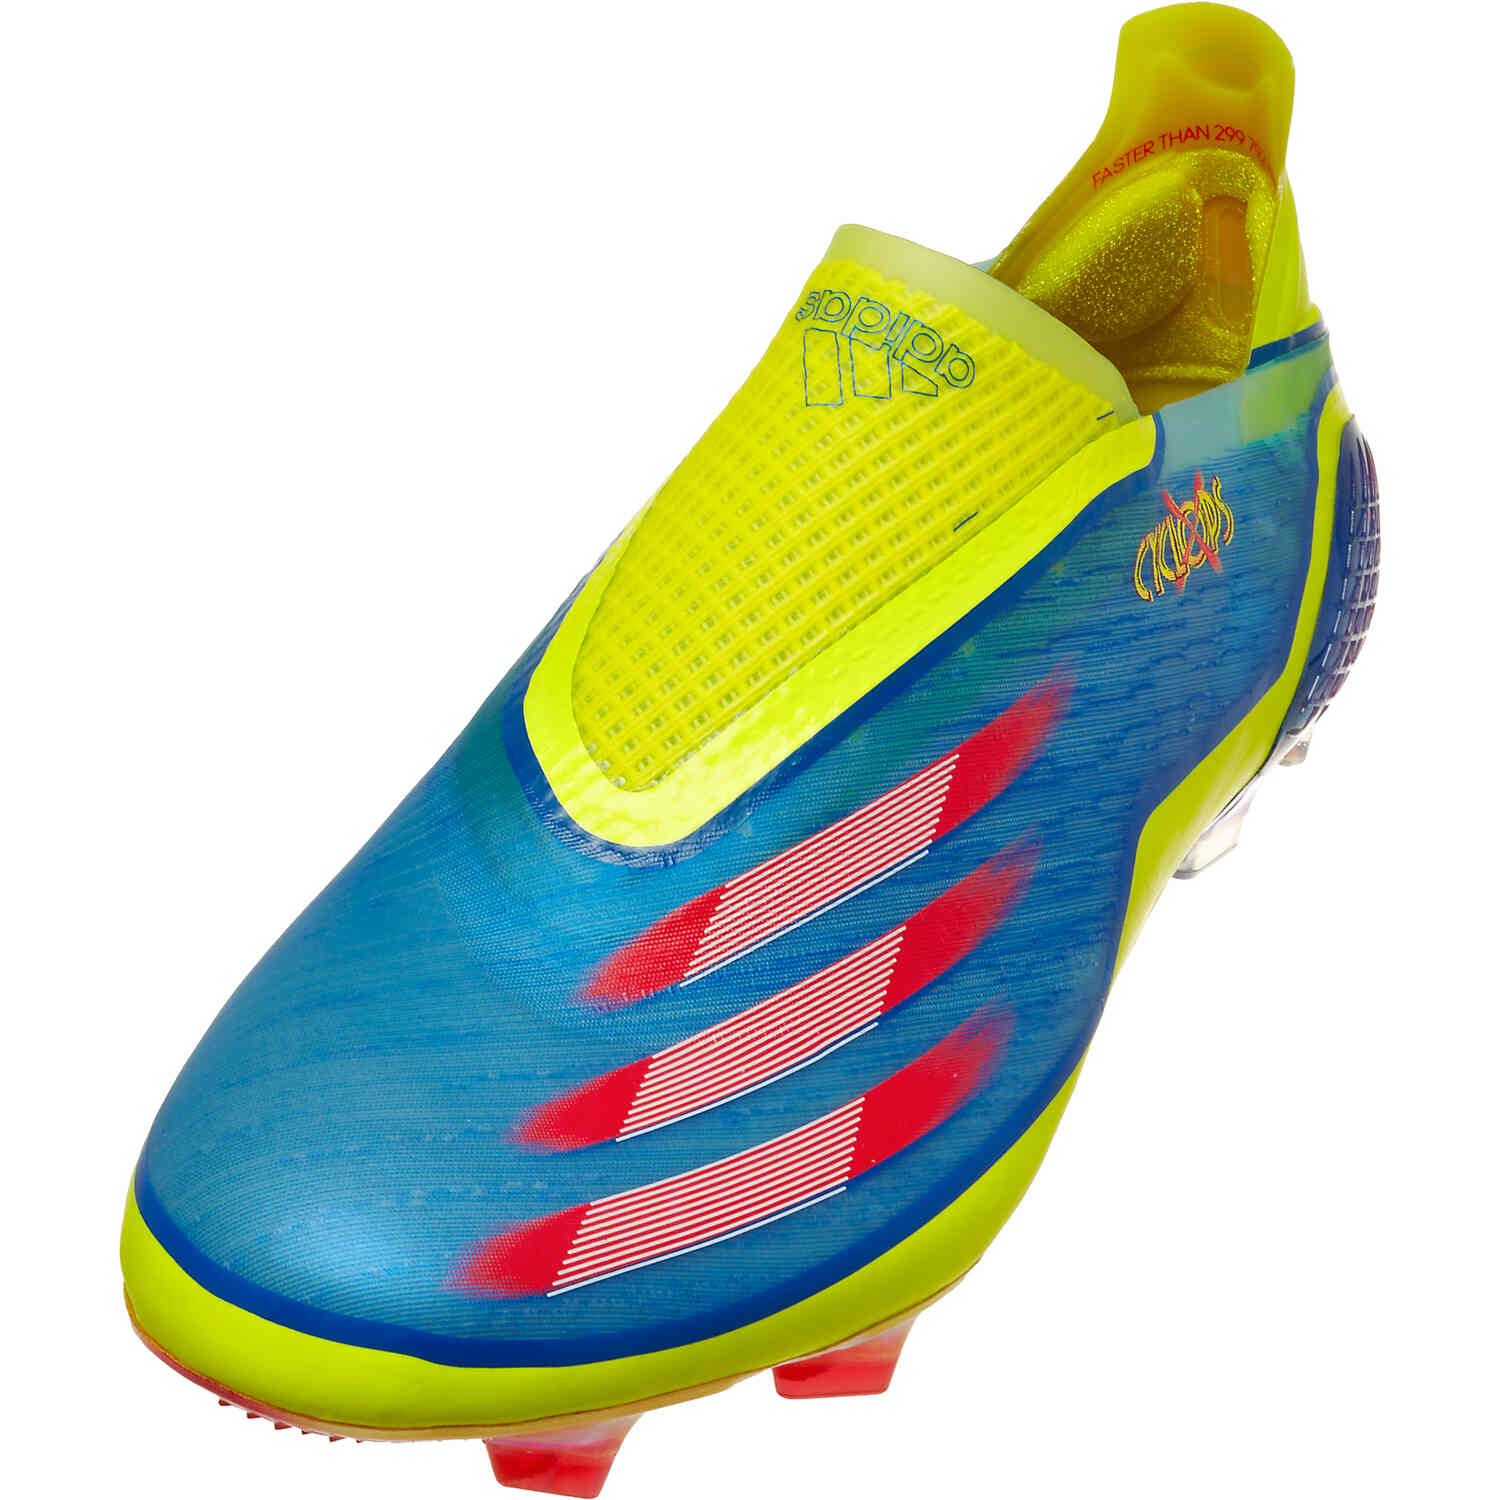 x Marvel X-Men X FG Firm Ground Soccer Cleats - Blue & Vivid Red with Bright Yellow - Soccer Master